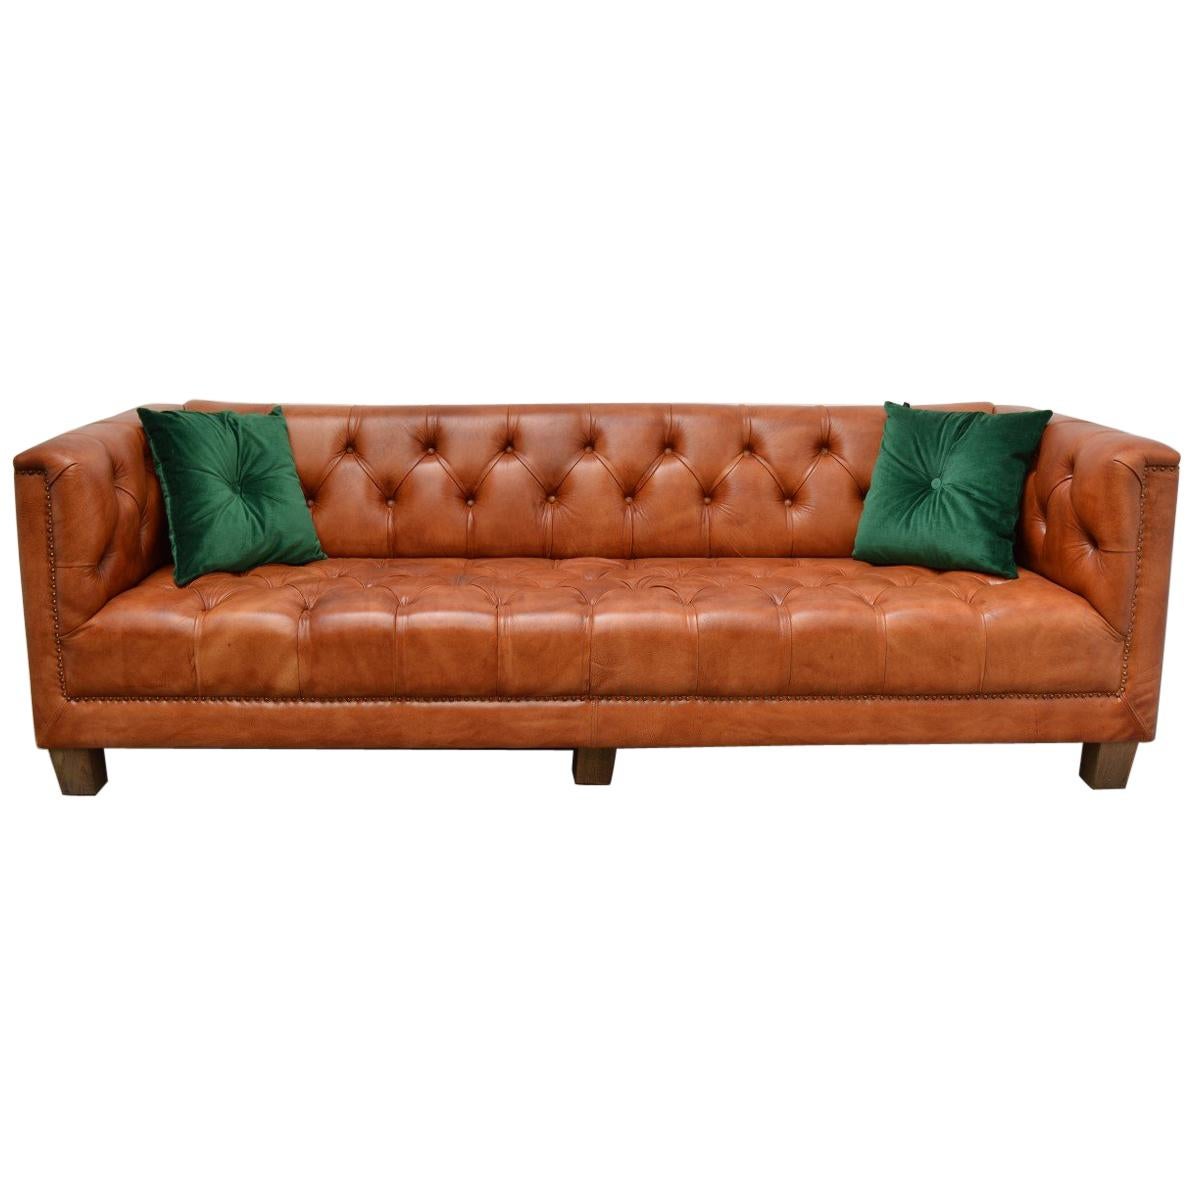 Contemporary Retro Look Chesterfield For Sale